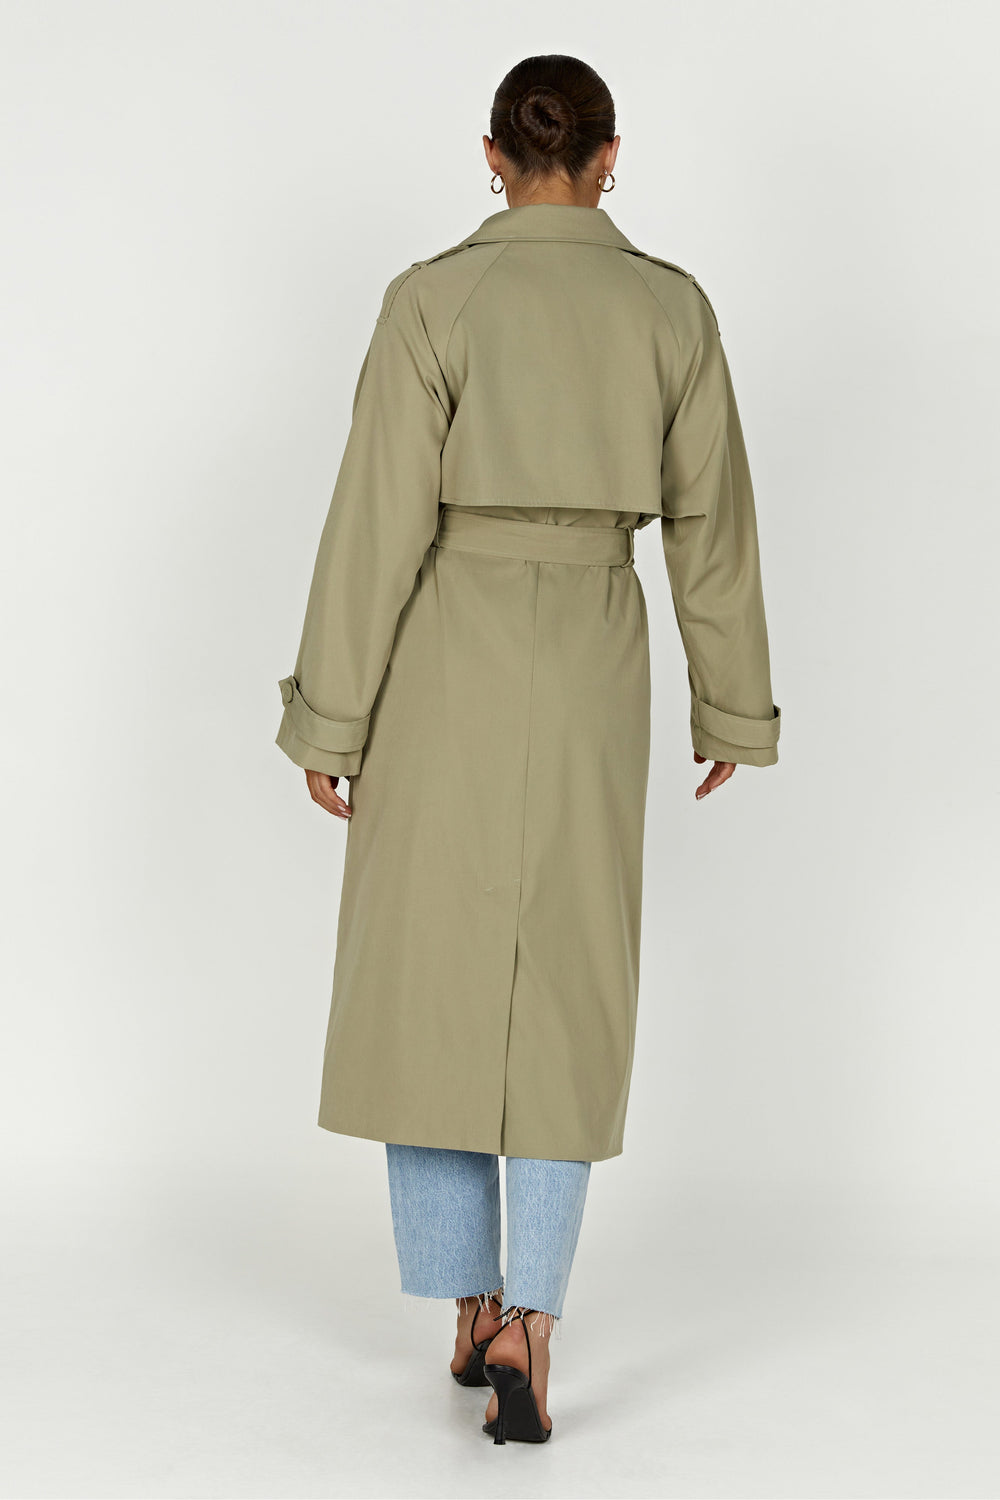 Andreas Oversized Trench Coat - Olive